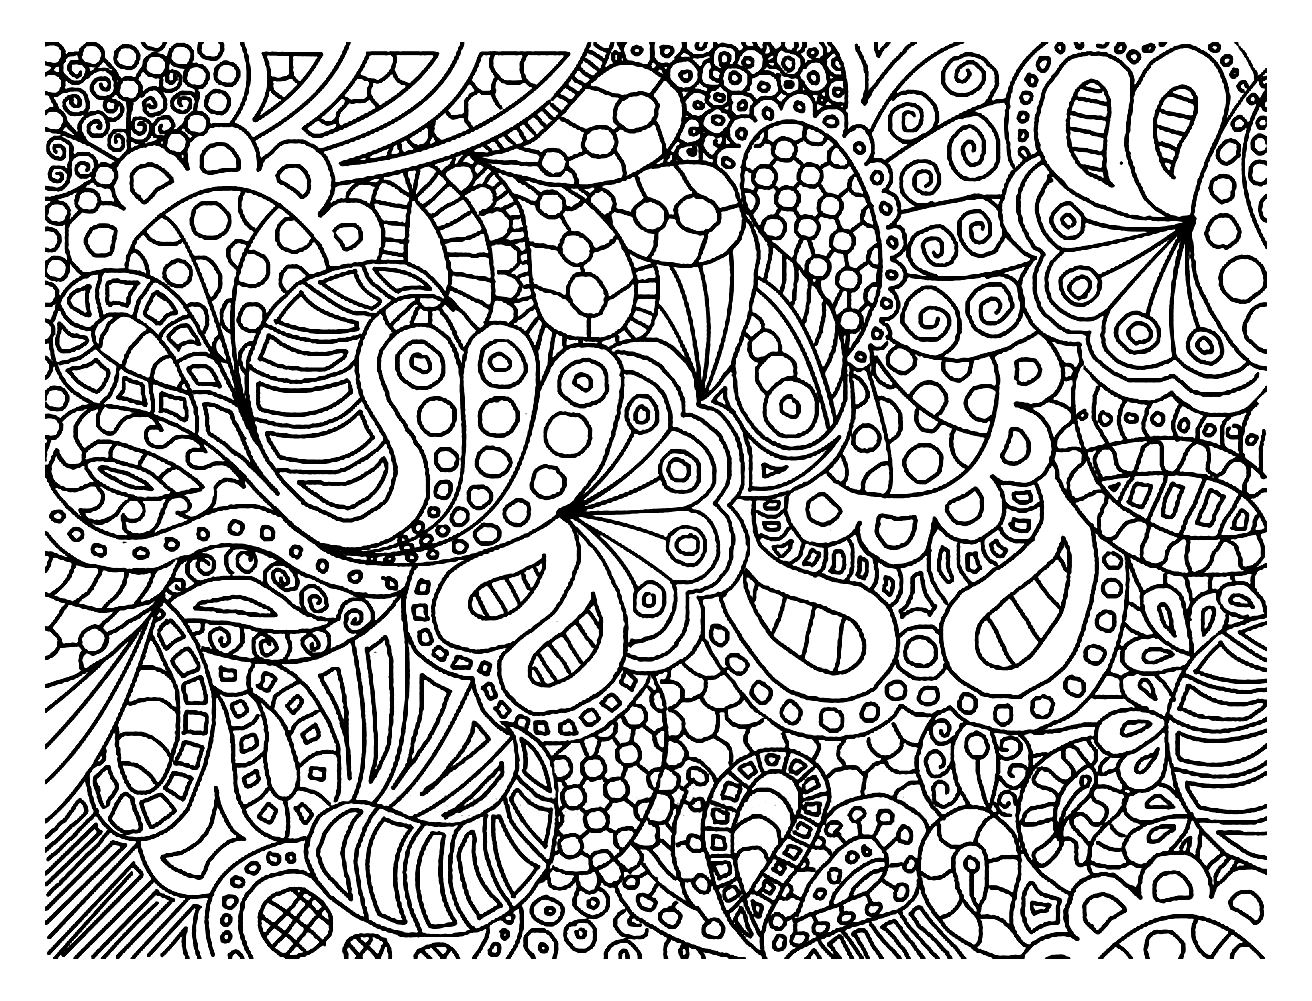 A great example of Doodle artFrom the gallery : Doodling / Doodle Art